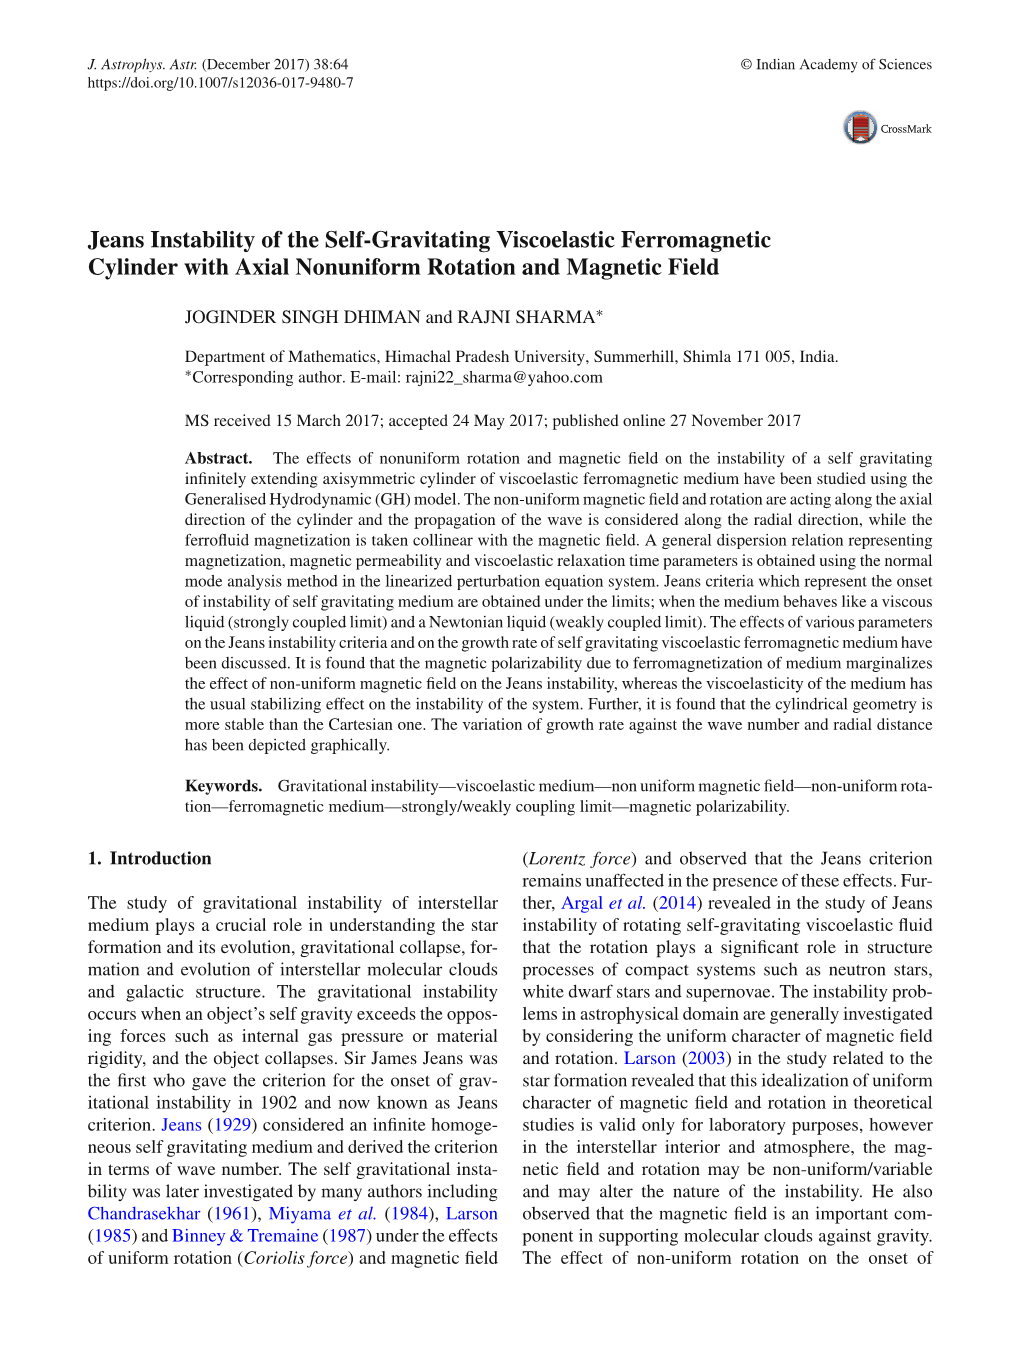 Jeans Instability of the Self-Gravitating Viscoelastic Ferromagnetic Cylinder with Axial Nonuniform Rotation and Magnetic Field